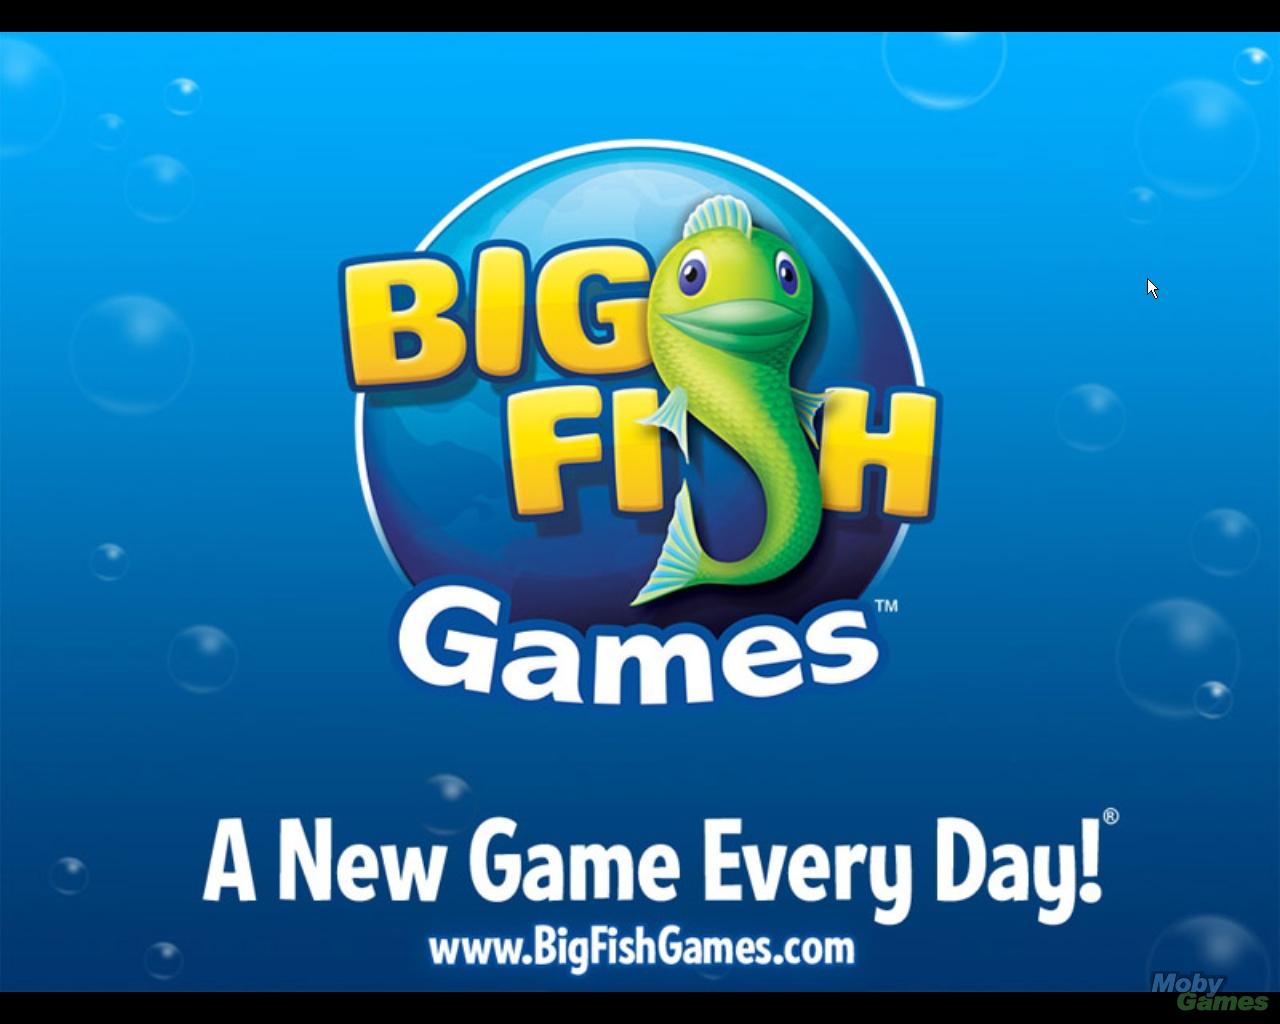 Geek insider, geekinsider, geekinsider. Com,, win it! $25 itunes gift card giveaway - courtesy of big fish games! , contests